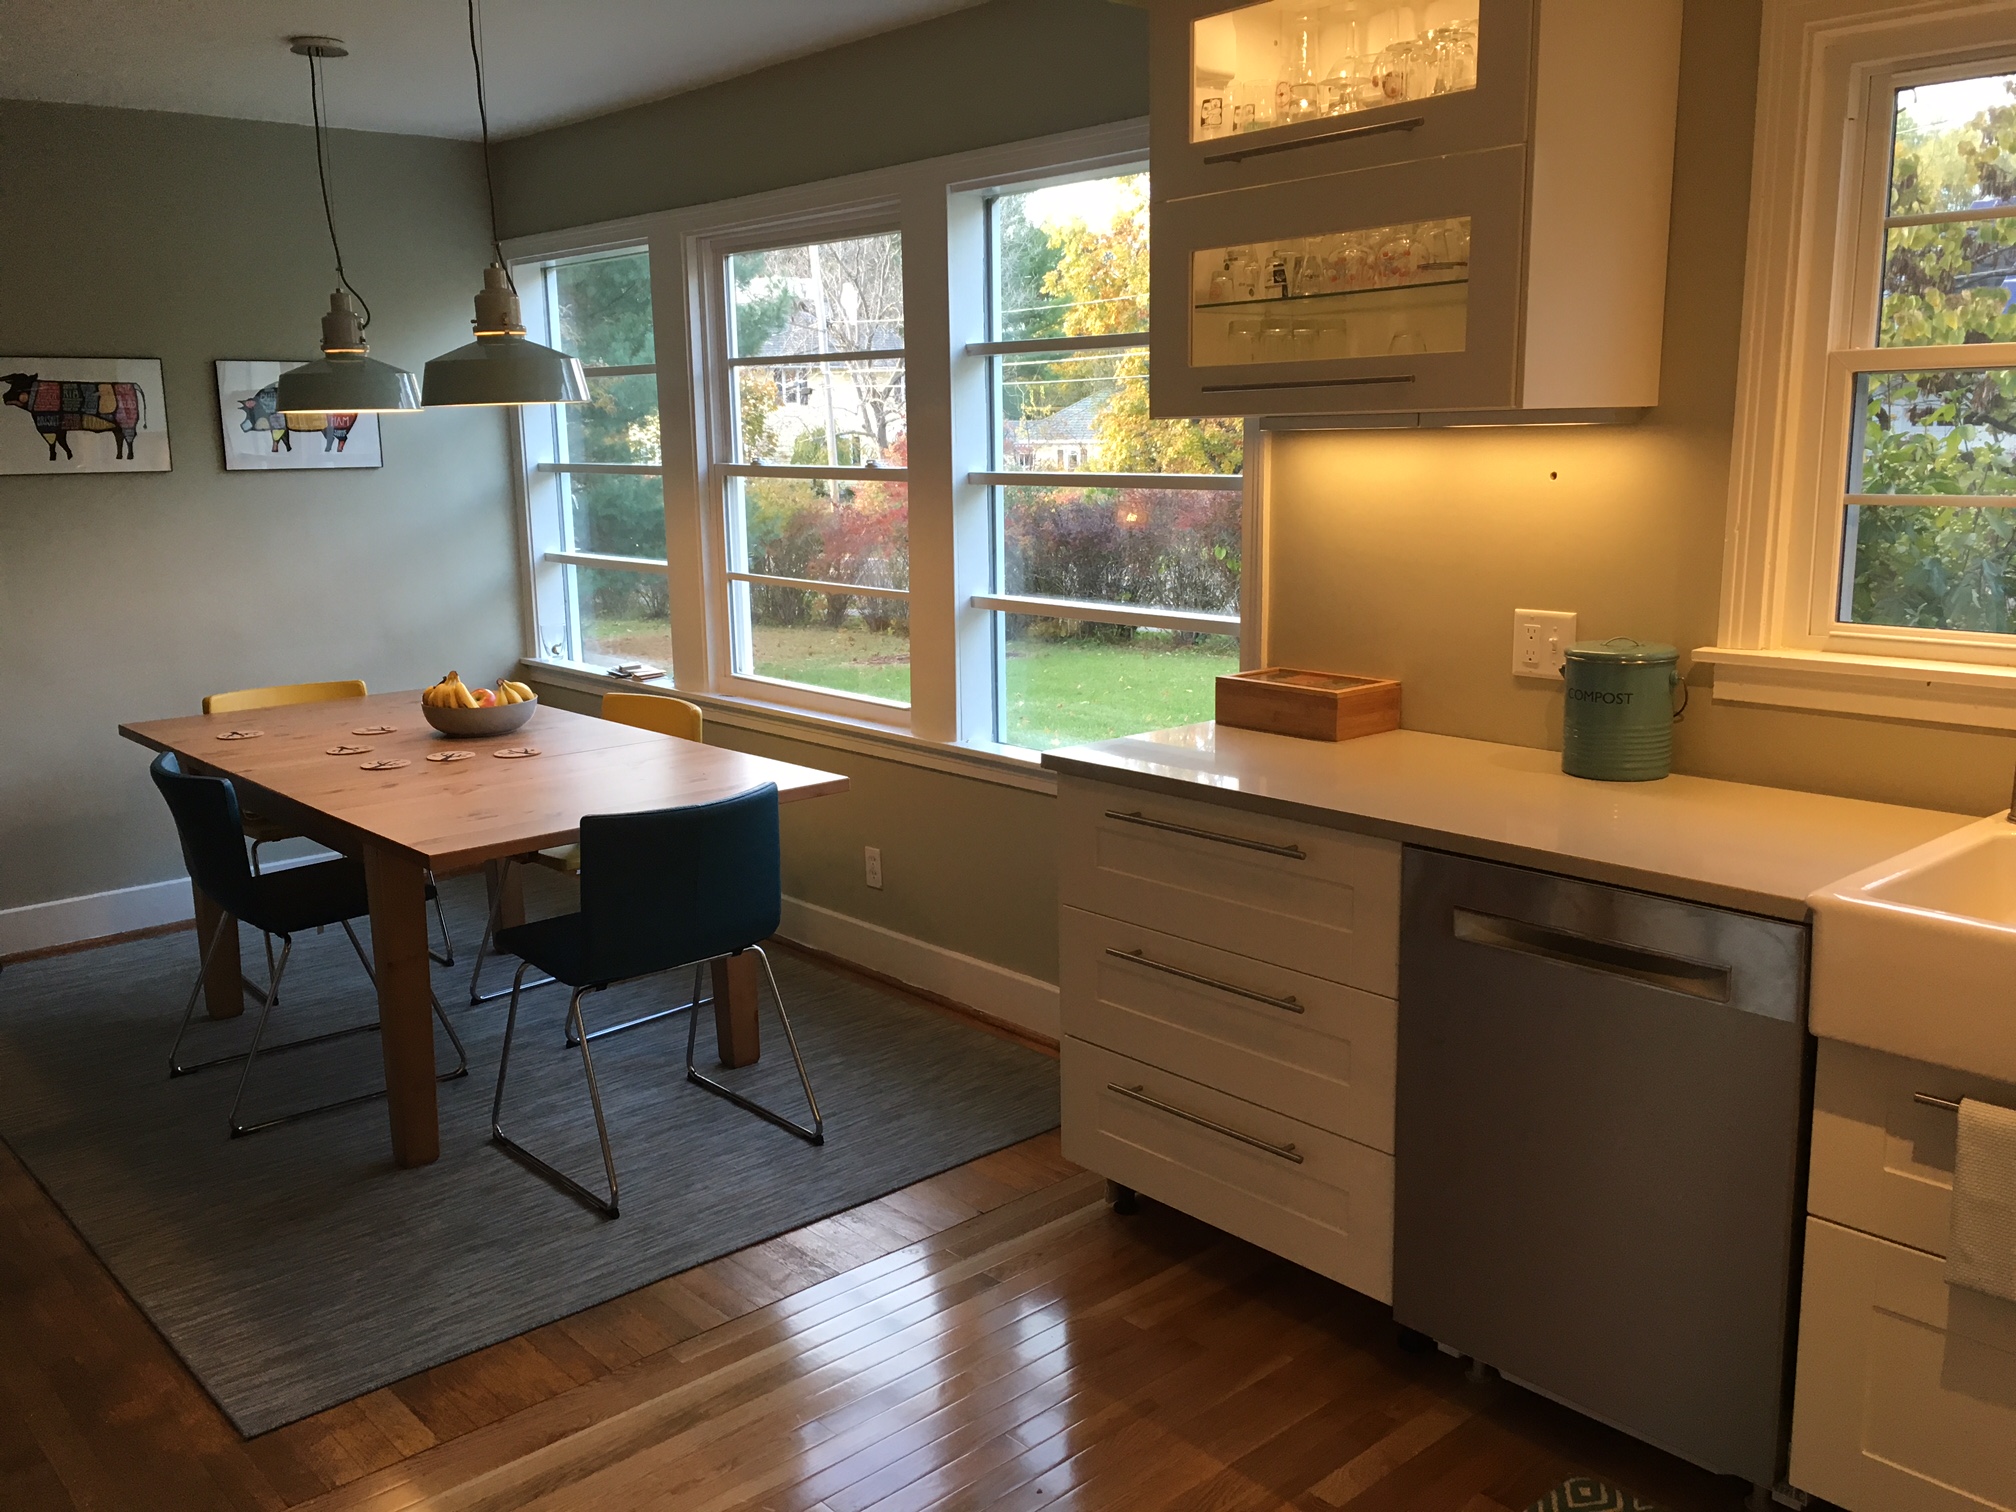 A Gorgeous IKEA Kitchen Renovation in Upstate New York